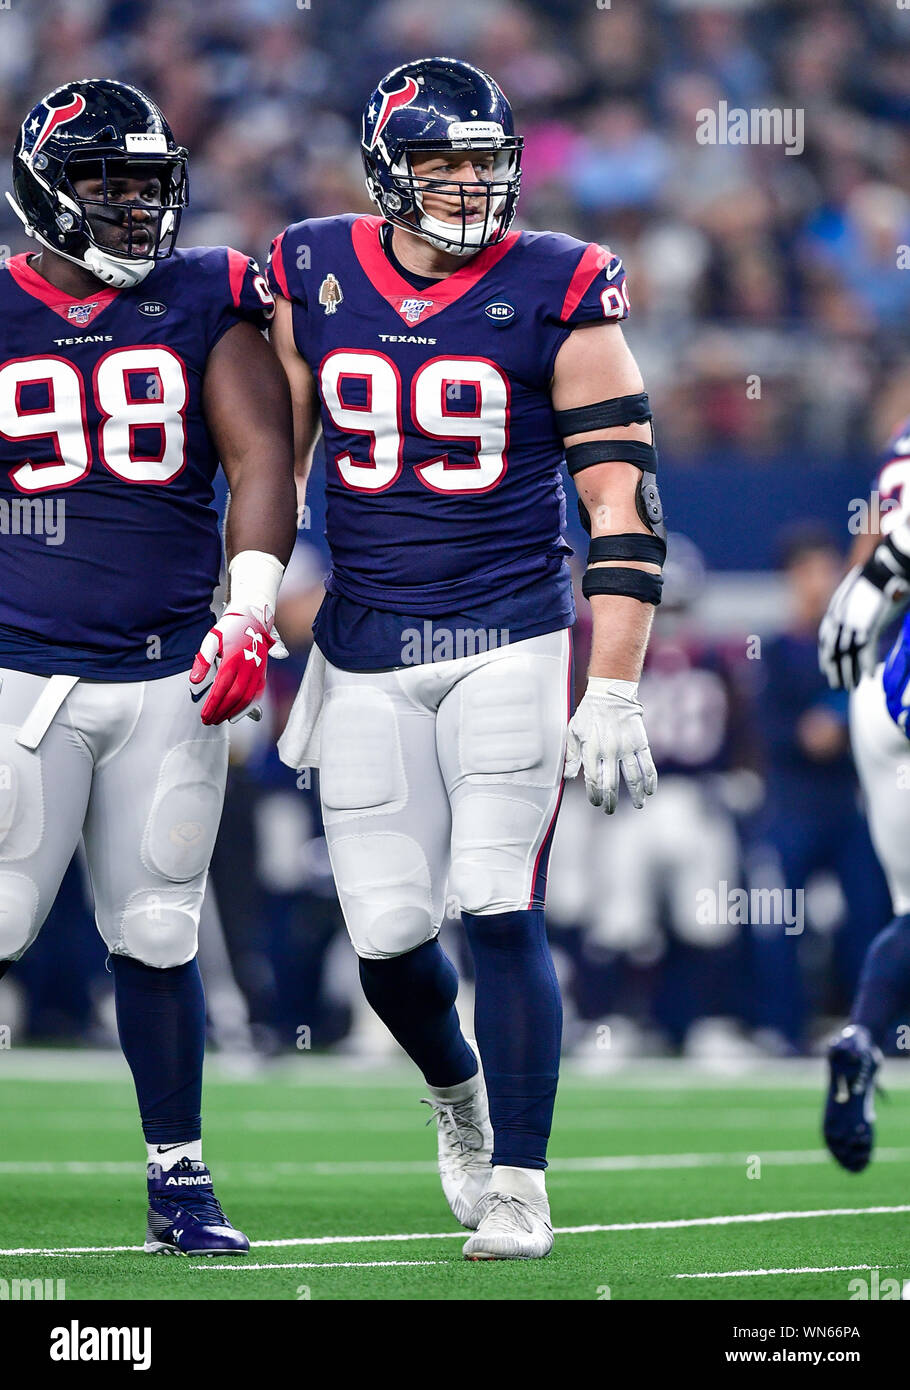 August 24th, 2019:.Houston Texans defensive end J.J. Watt (99) in action.during an NFL football game between the Houston Texans and Dallas Cowboys at AT&T Stadium in Arlington, Texas. Manny Flores/CSM Stock Photo